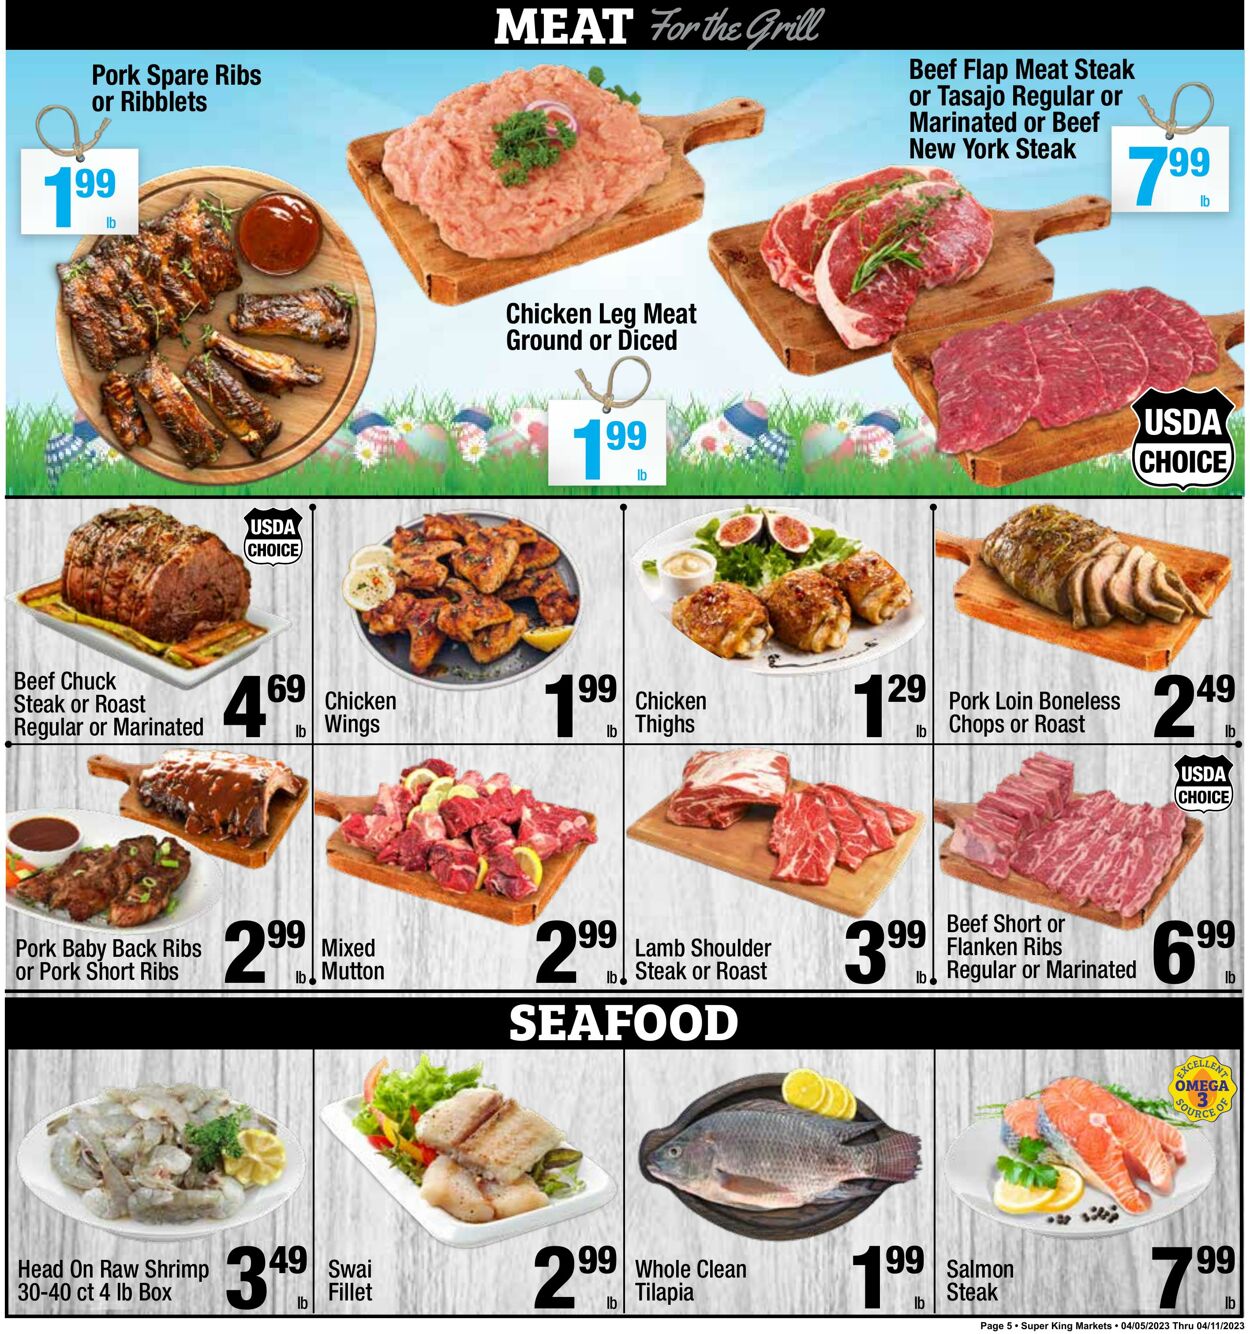 Weekly ad Super King Markets 04/05/2023 - 04/11/2023